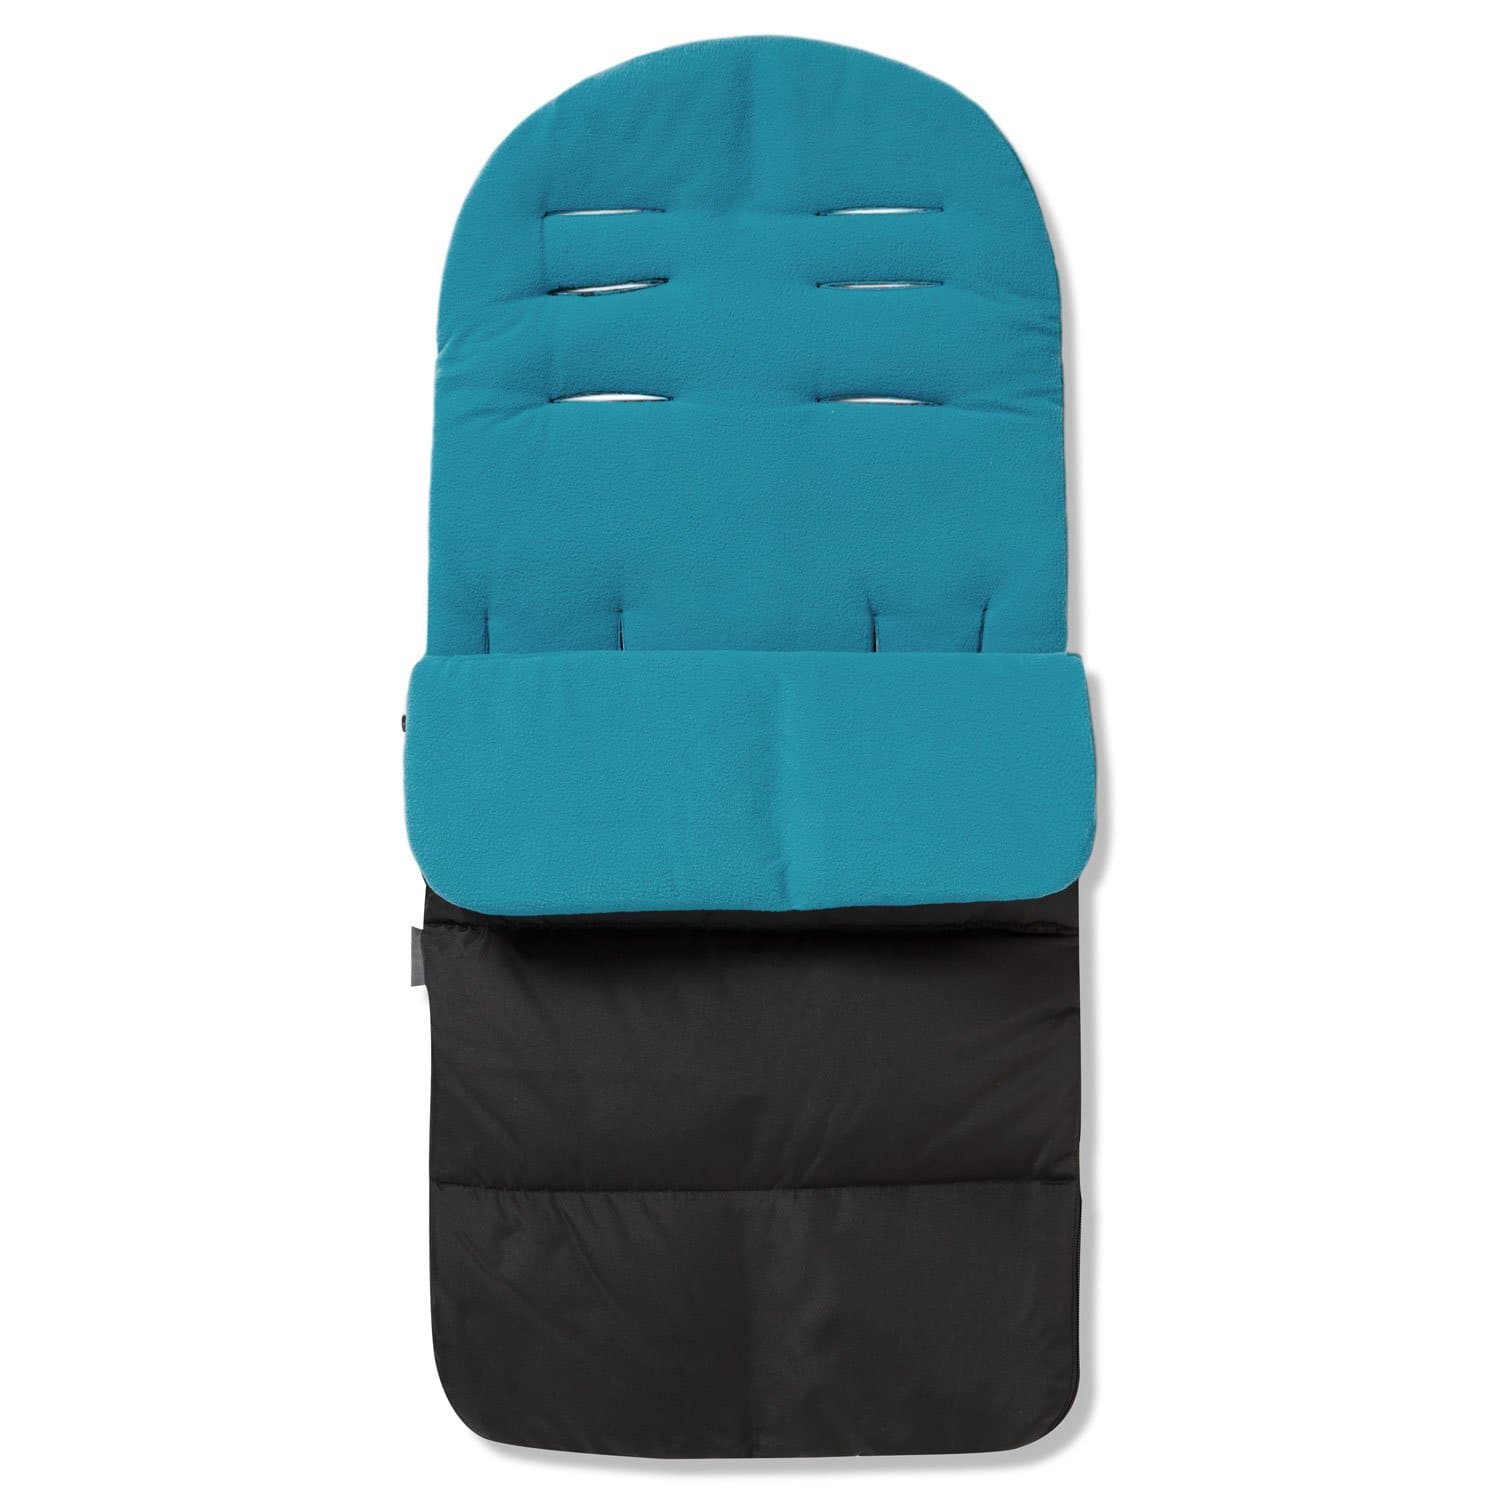 Premium Footmuff / Cosy Toes Compatible with Hauck - Ocean Blue / Fits All Models | For Your Little One